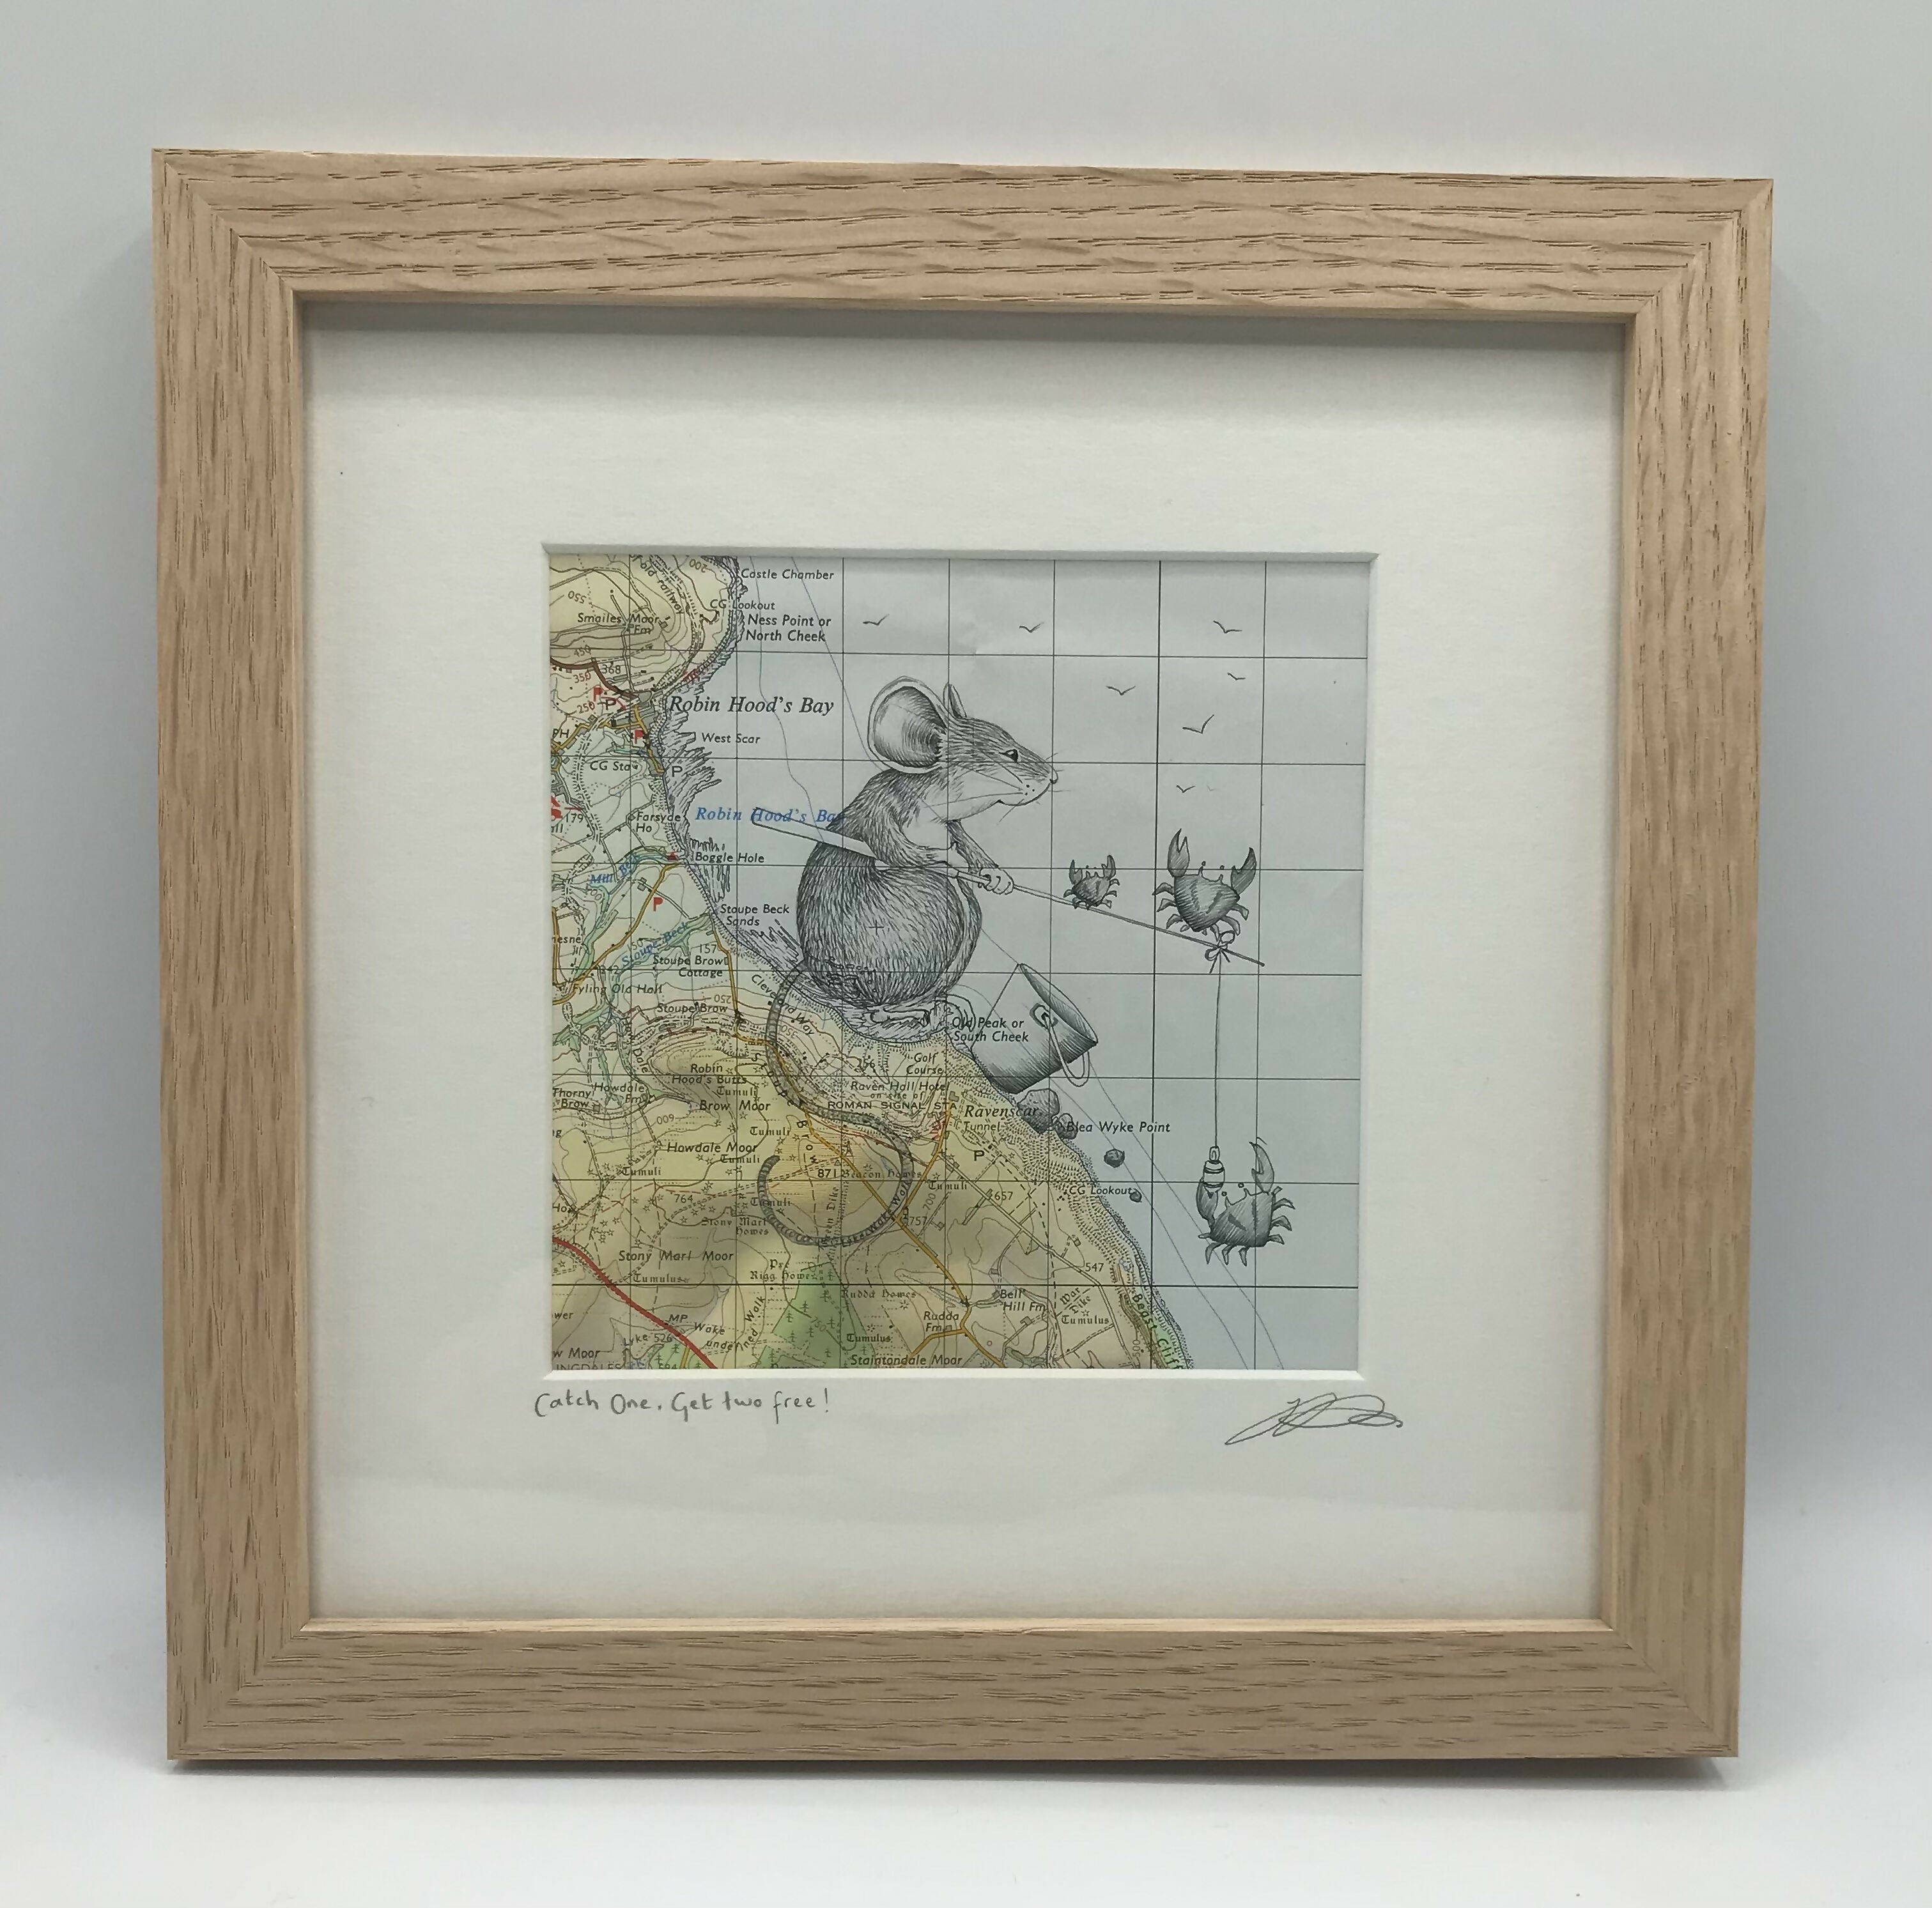 Catch One, Get Two Free! - Original Pen Drawing on vintage map ( ROBIN HOODS BAY)